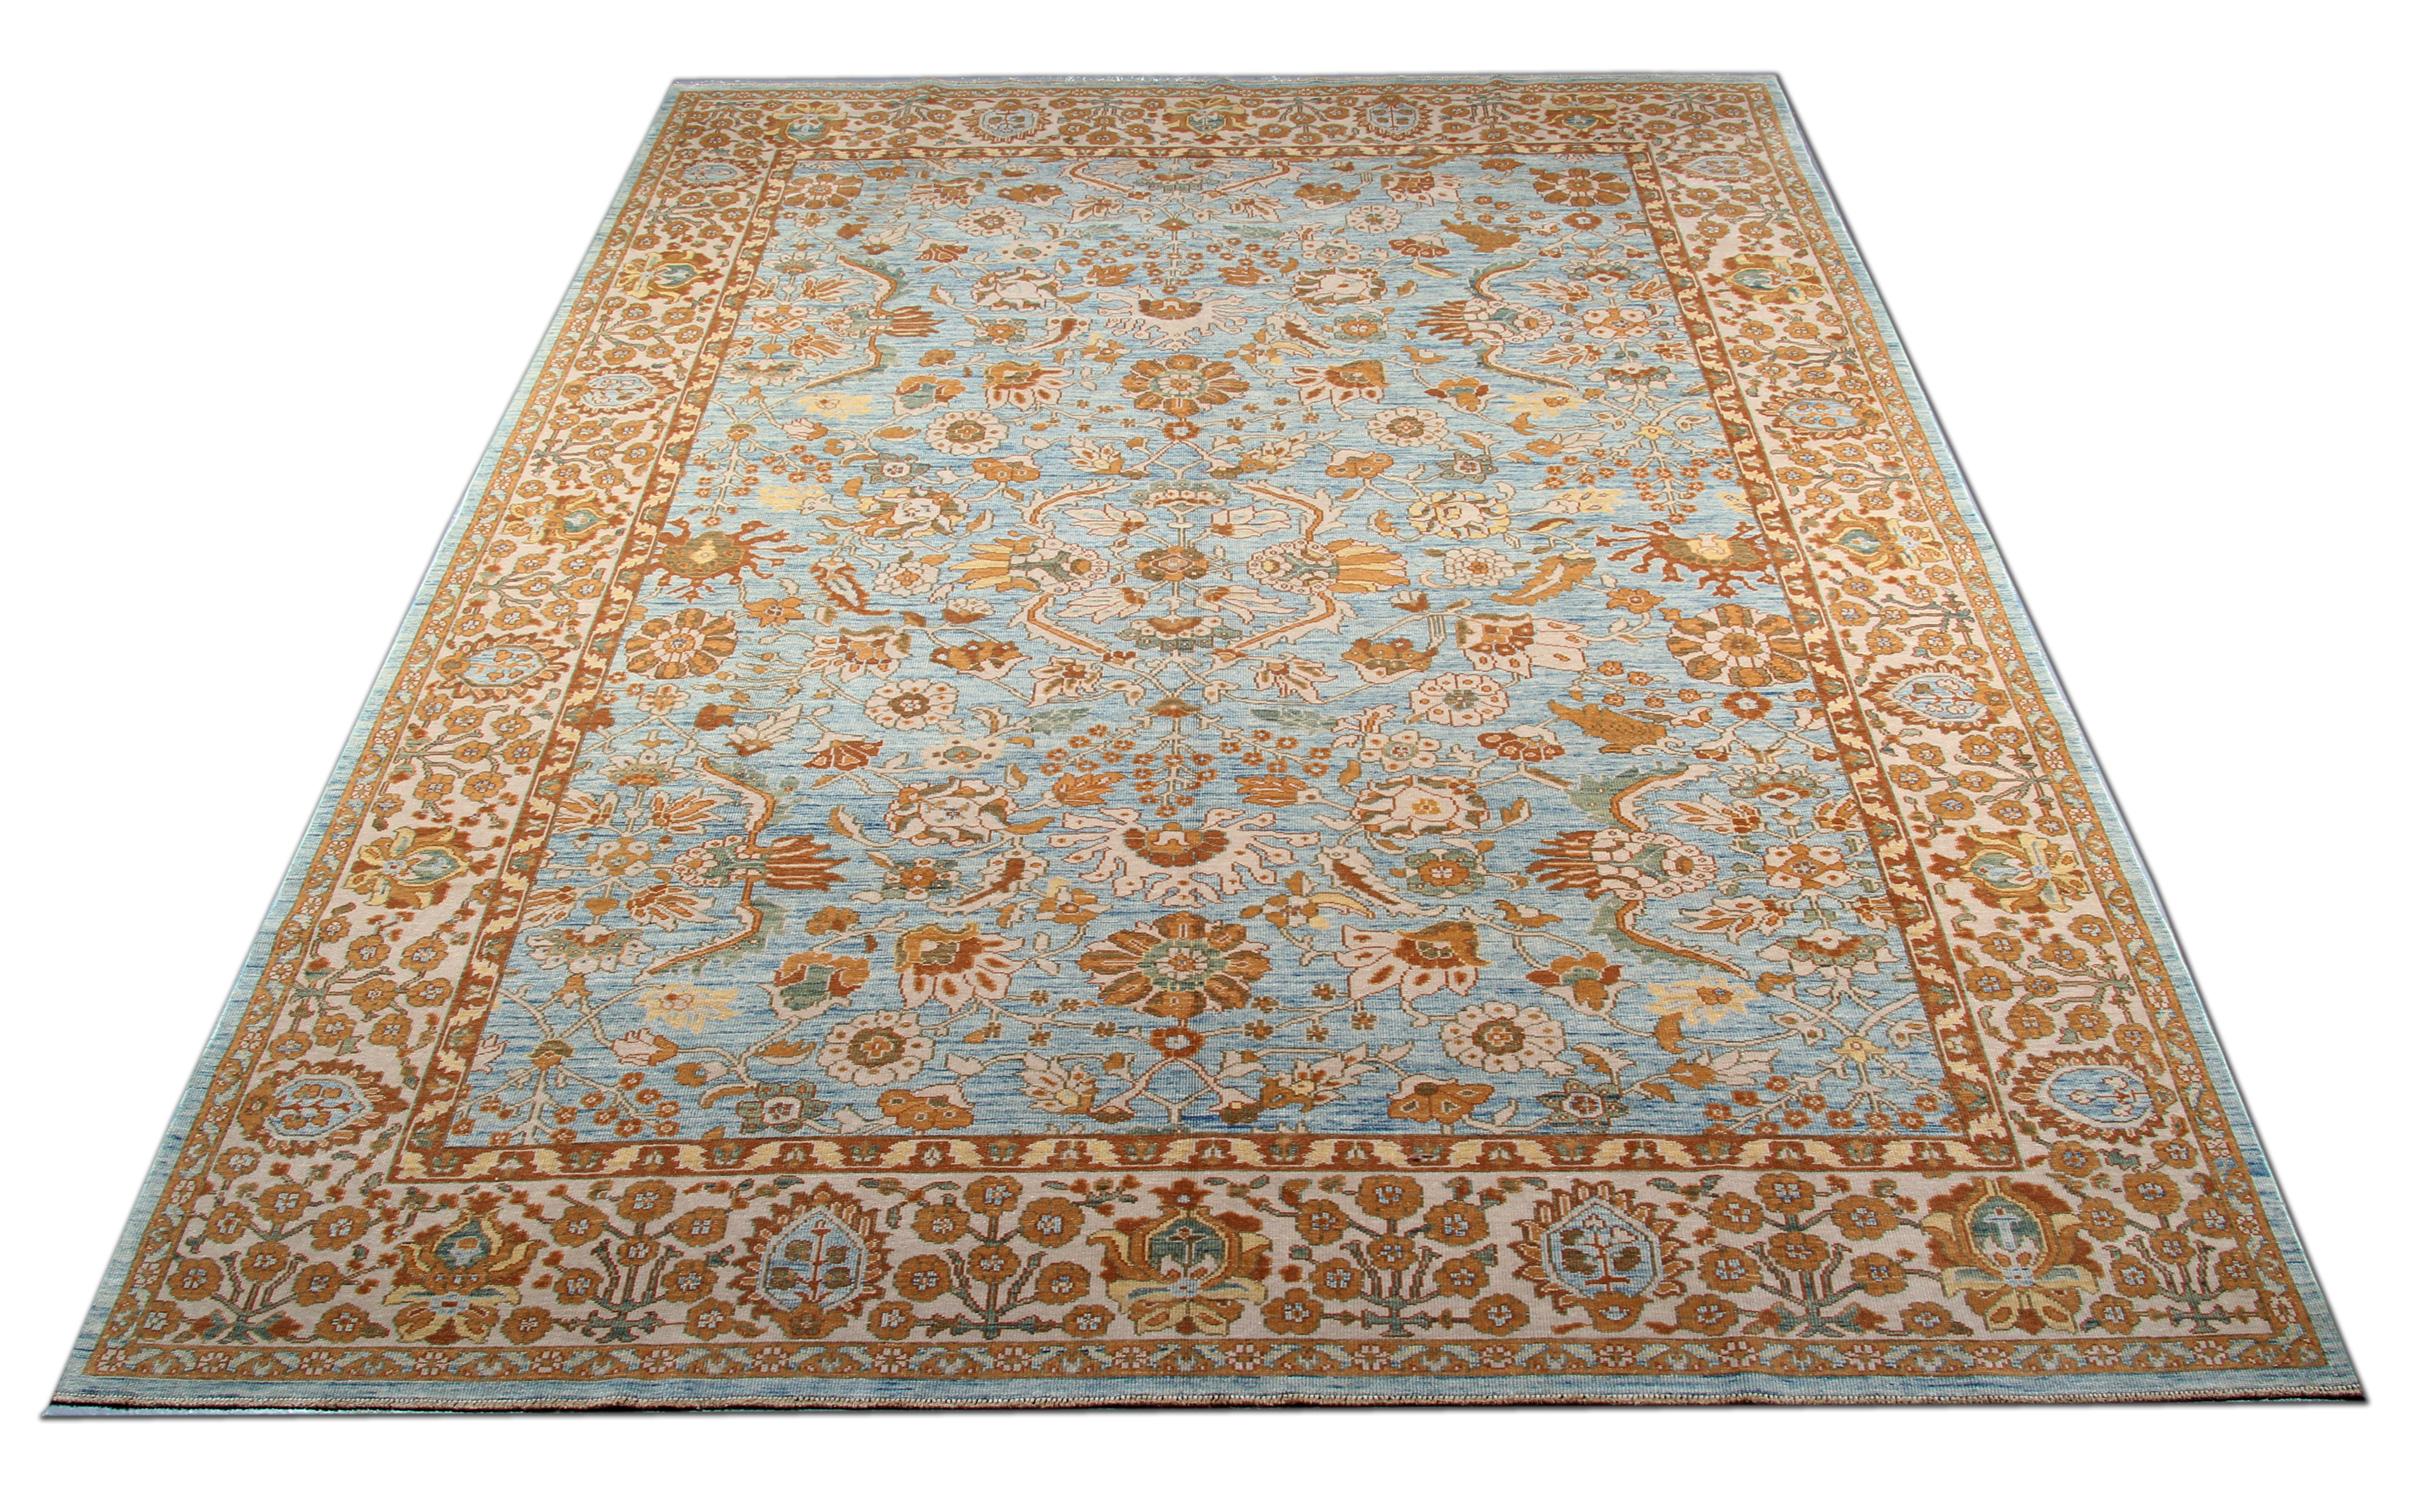 This traditional Ziegler style rug is one of our more luxurious rugs made on looms by master weavers of Afghan rugs. This cream rug is made with or all handspun wool, with the color coming from organic vegetable dyes. This carpet features an